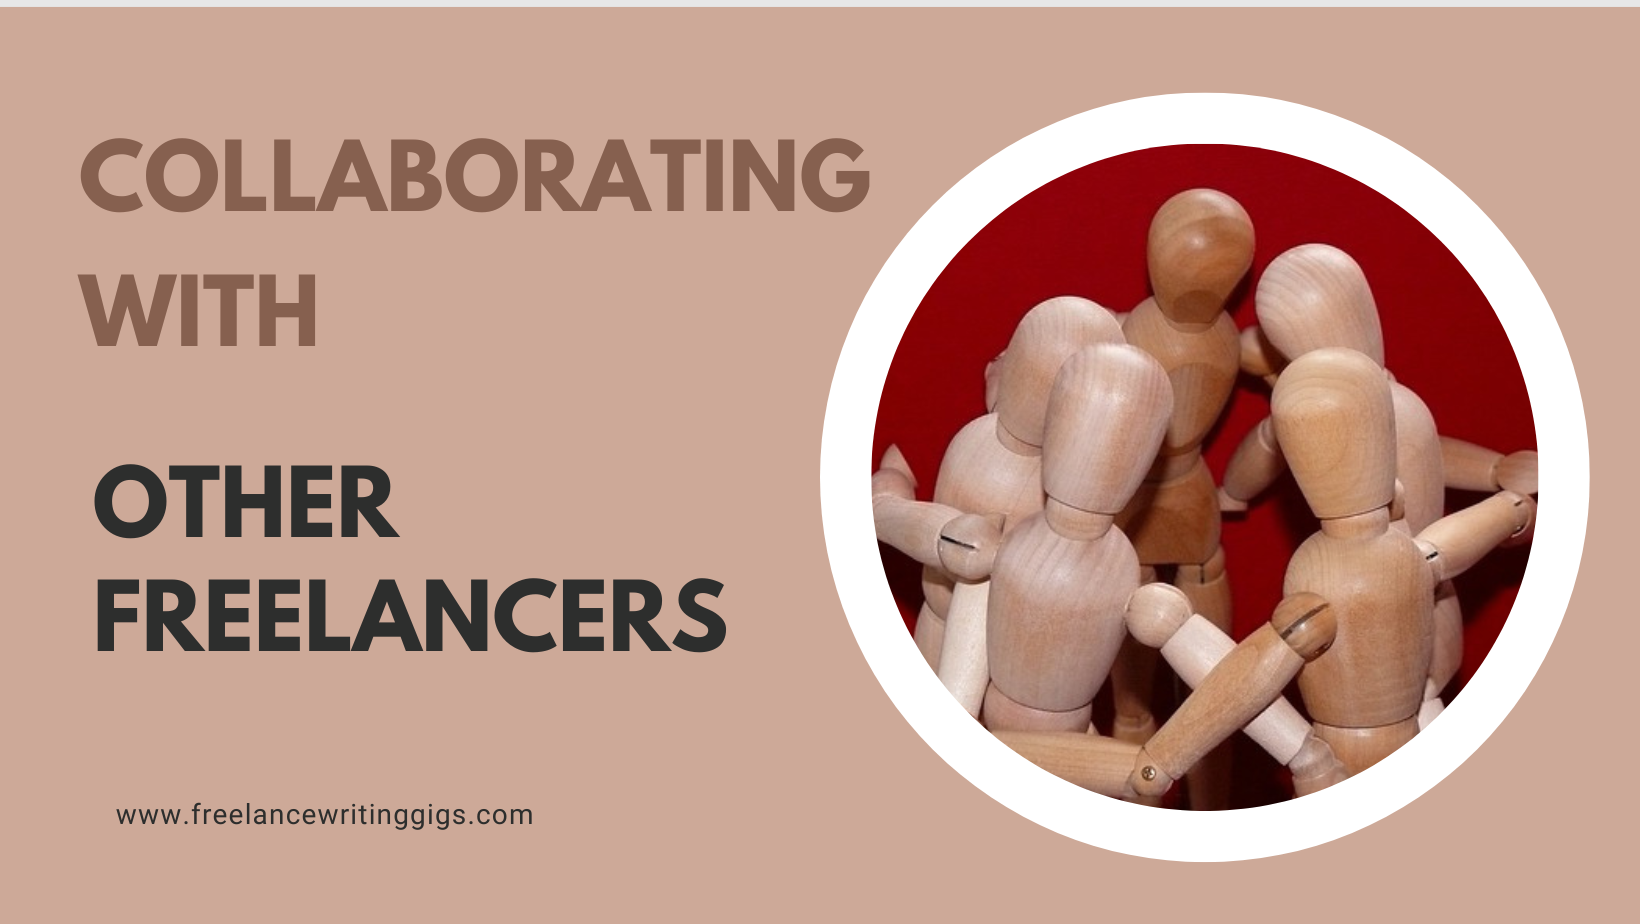 Should You Collaborate With Other Freelance Writers?